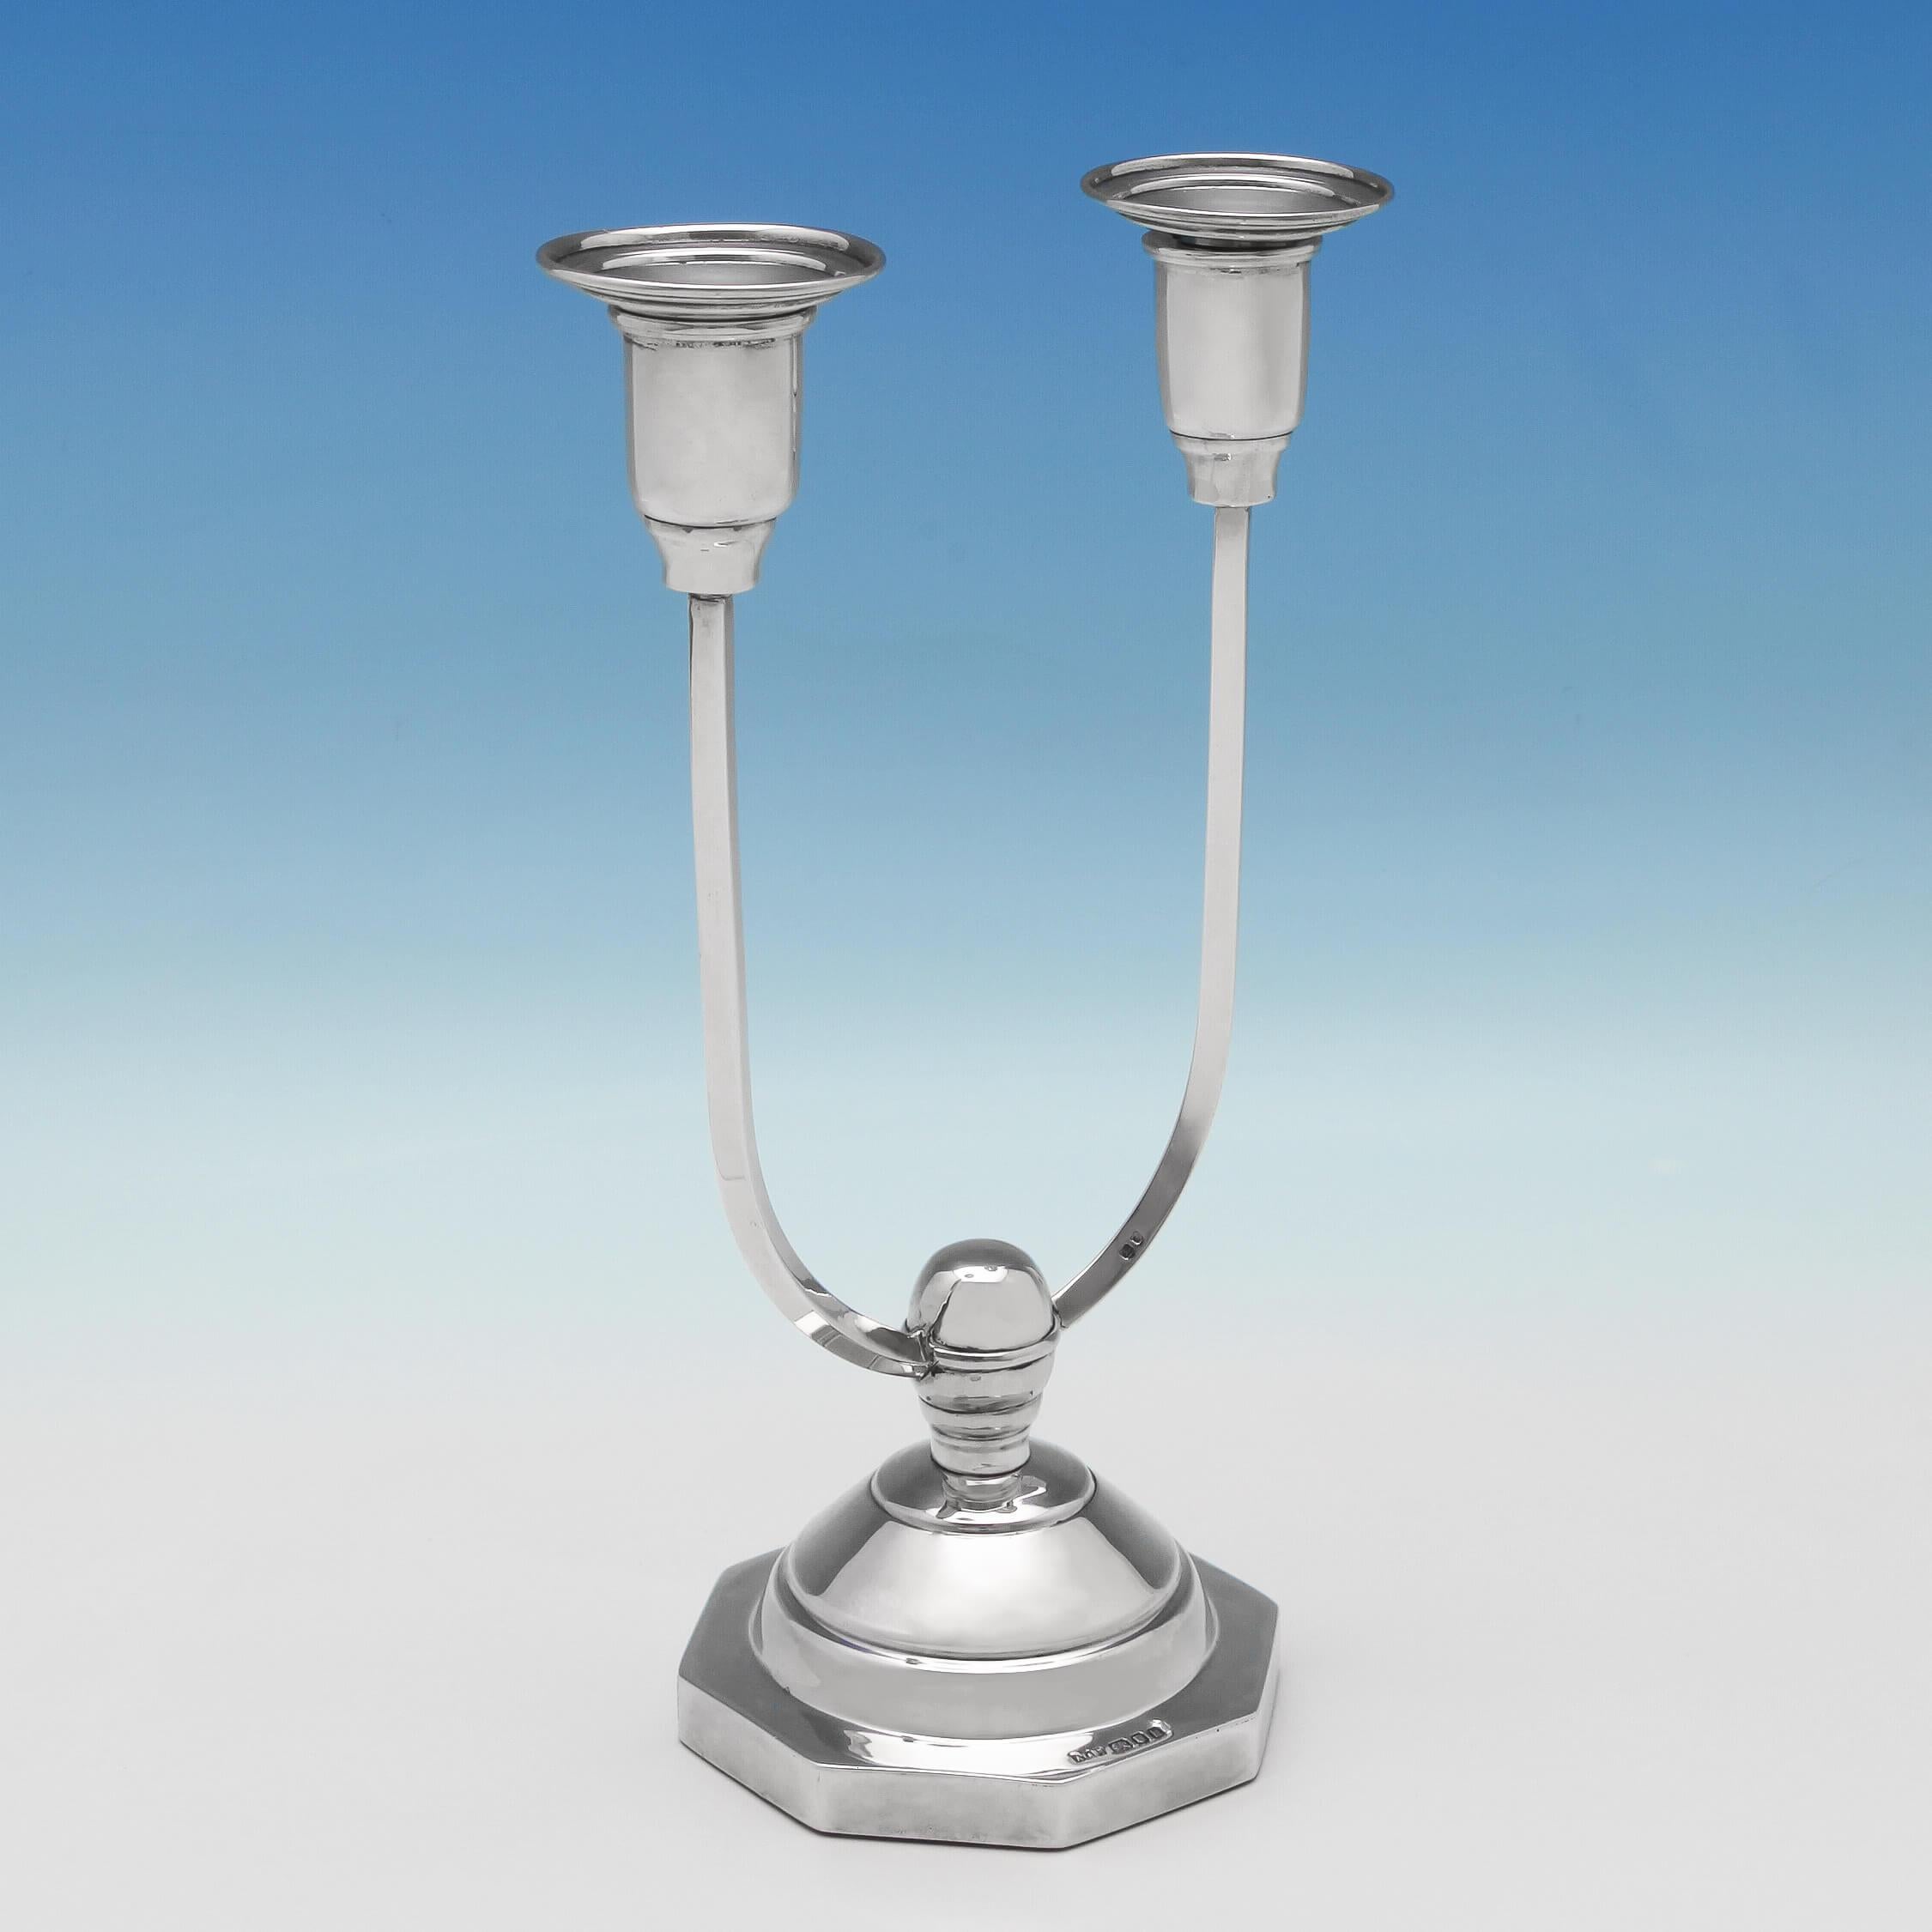 Hallmarked in London, 1946 by A. Taite & Sons, this unusual pair of George VI sterling silver Art Deco candelabra stand on filled, octagonal bases with u-shaped branches to hold two candles. They have removable sconces for ease of cleaning. The